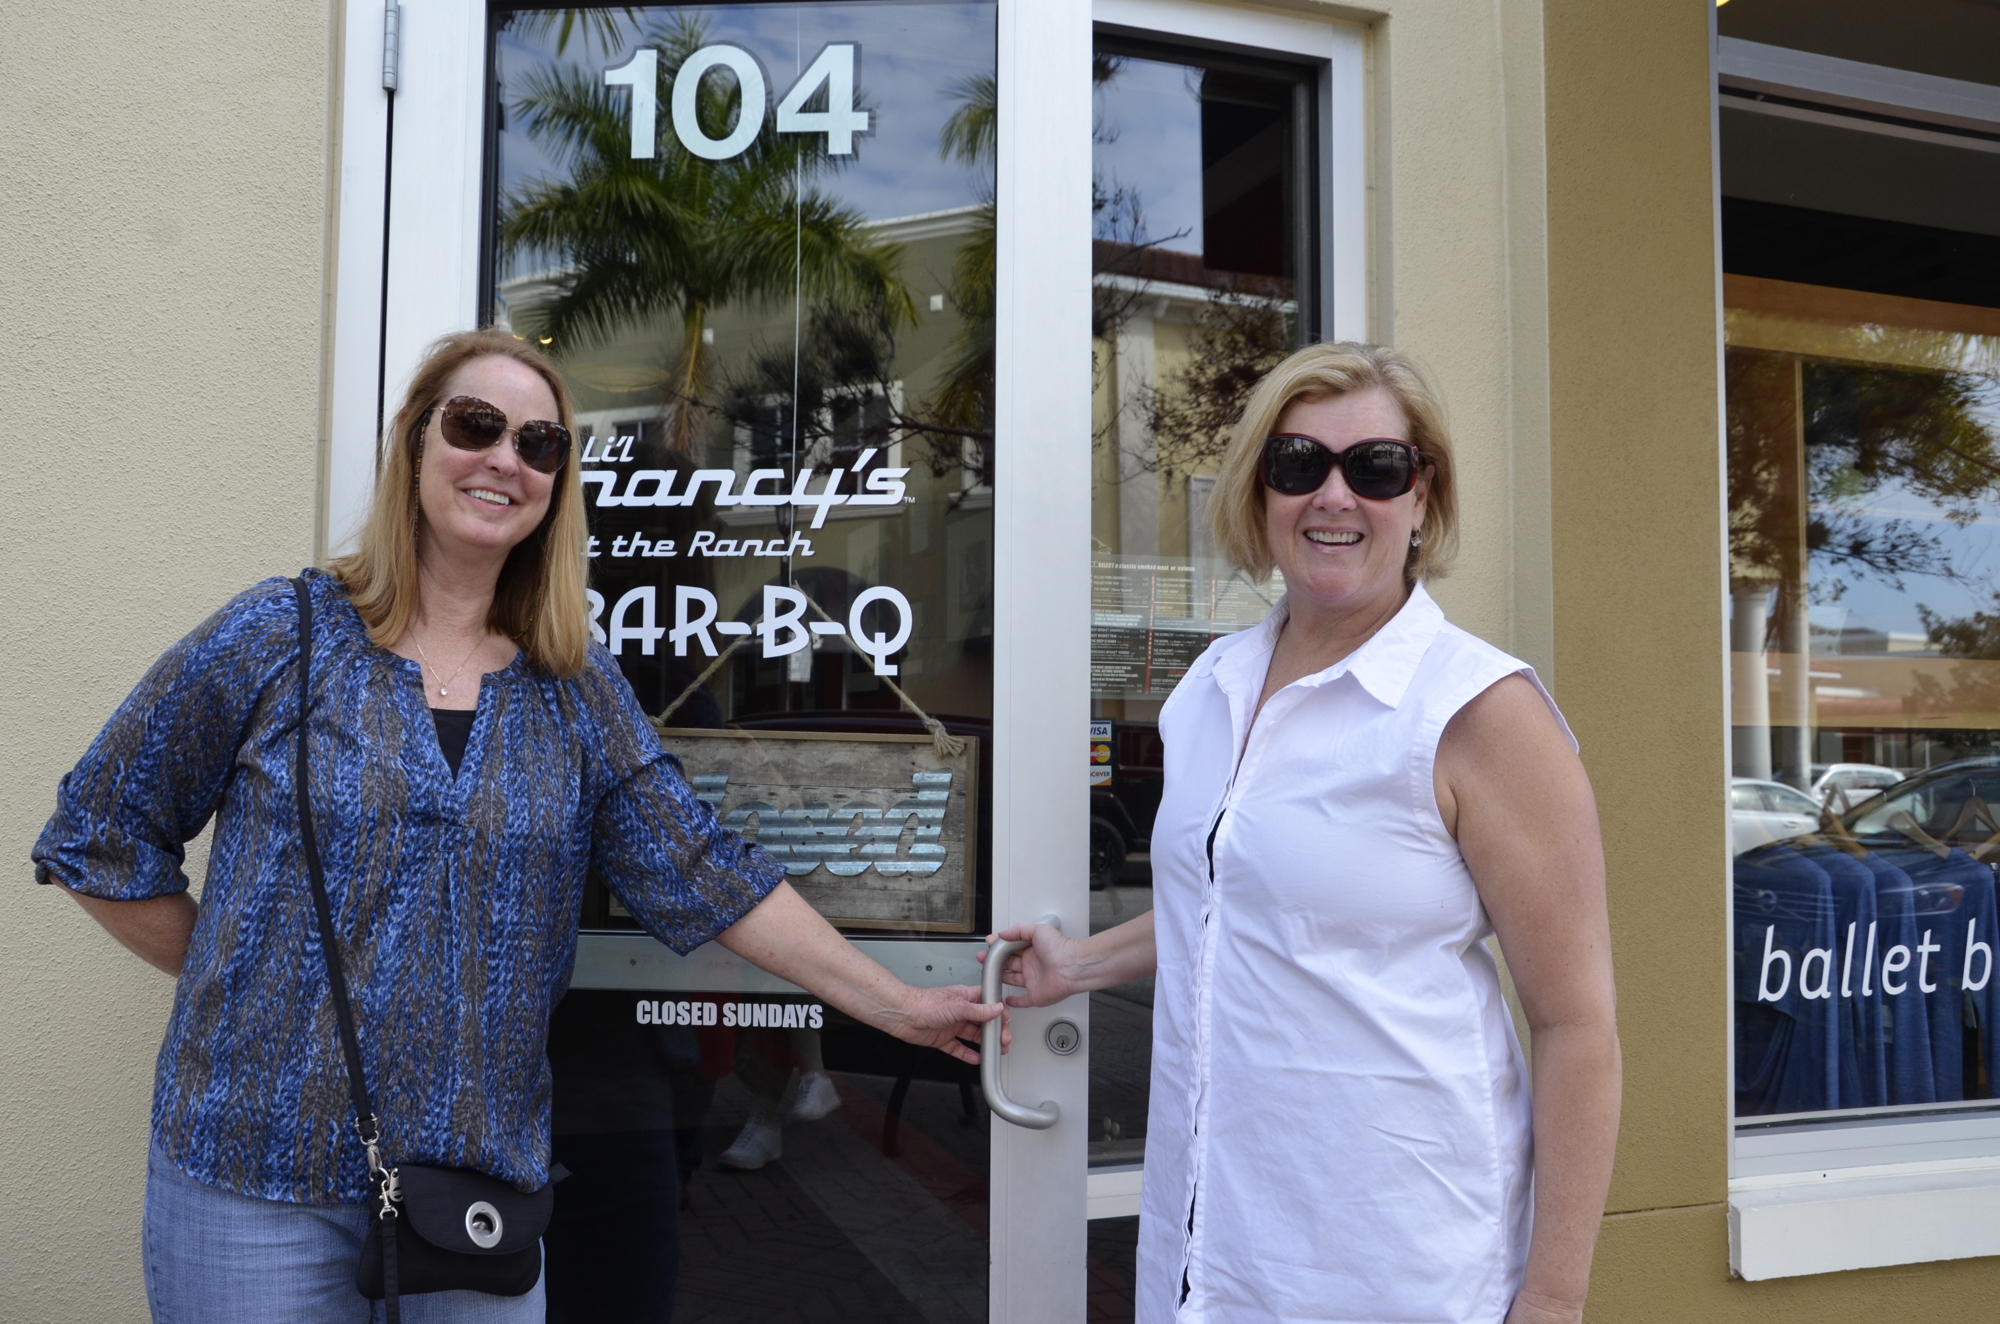 Nancy Krohngold's friends, Melissa Dunlap and Susan Mitchell, were determined to be the first in their friend's new location.